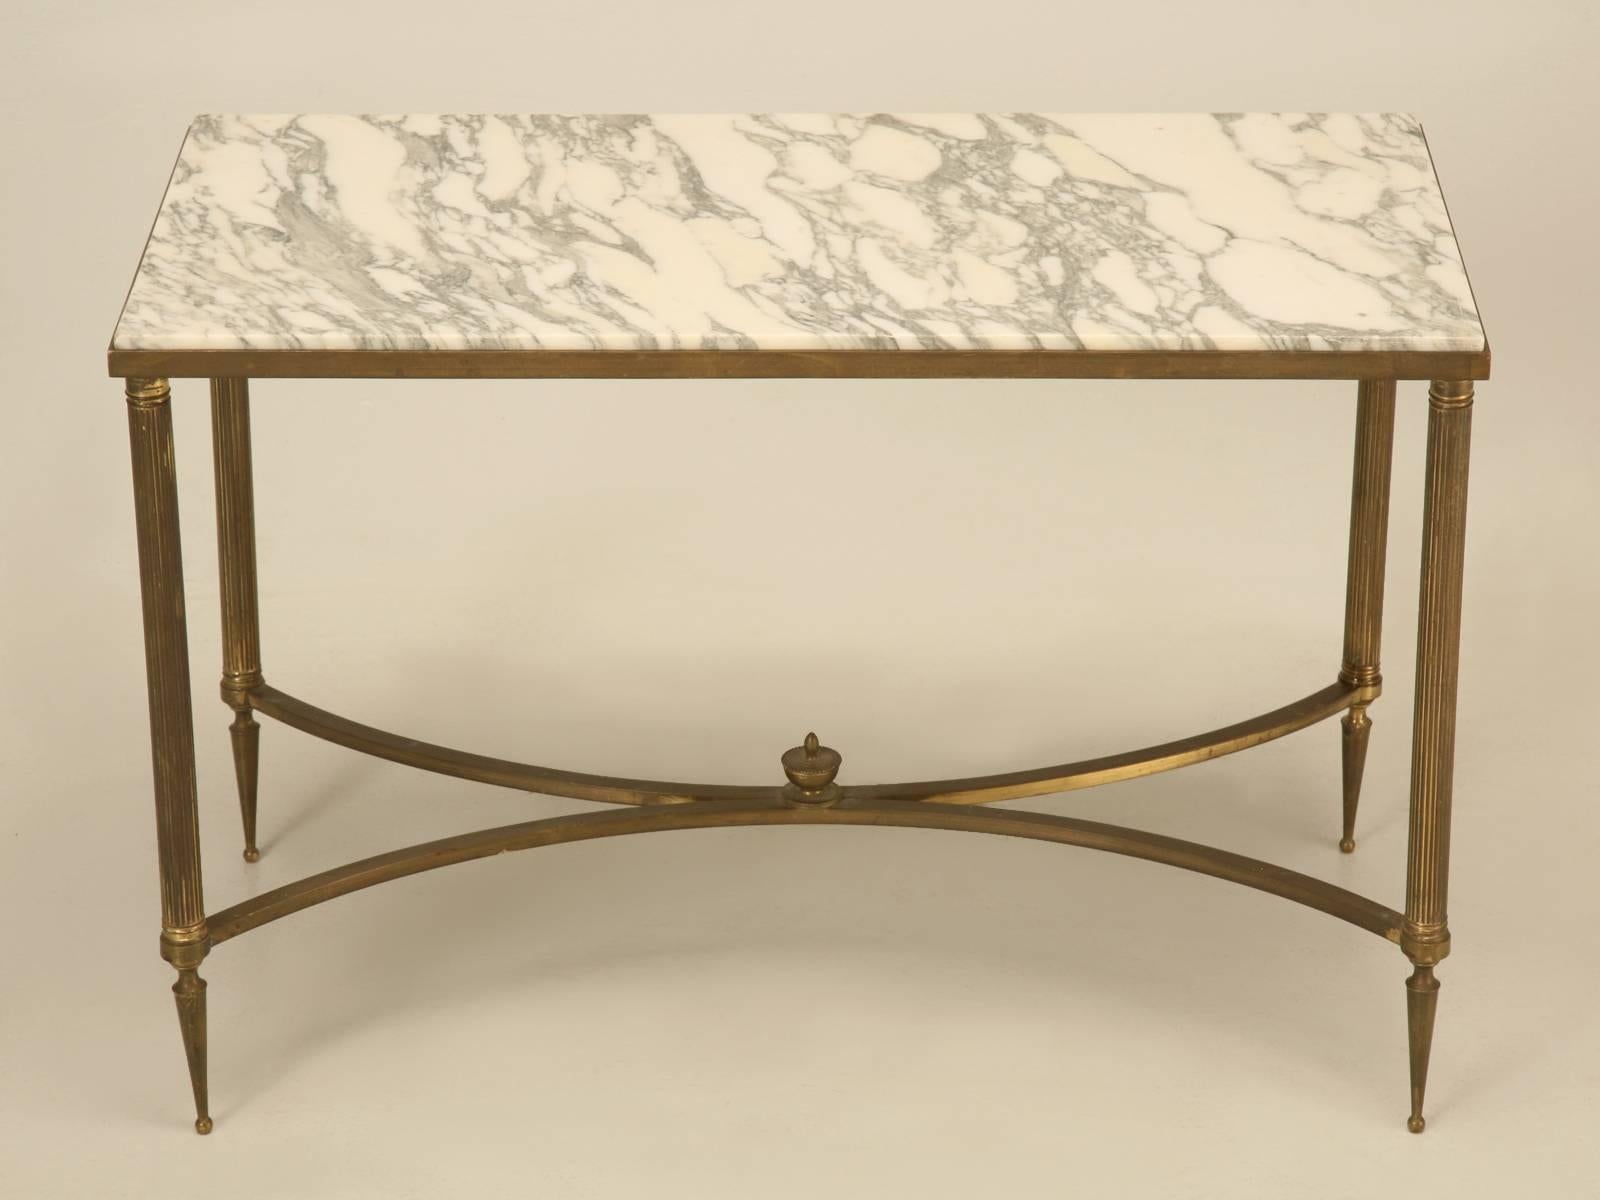 Vintage French Mid-Century Modern coffee table with a marble top over a brass-plated base in original unrestored condition.